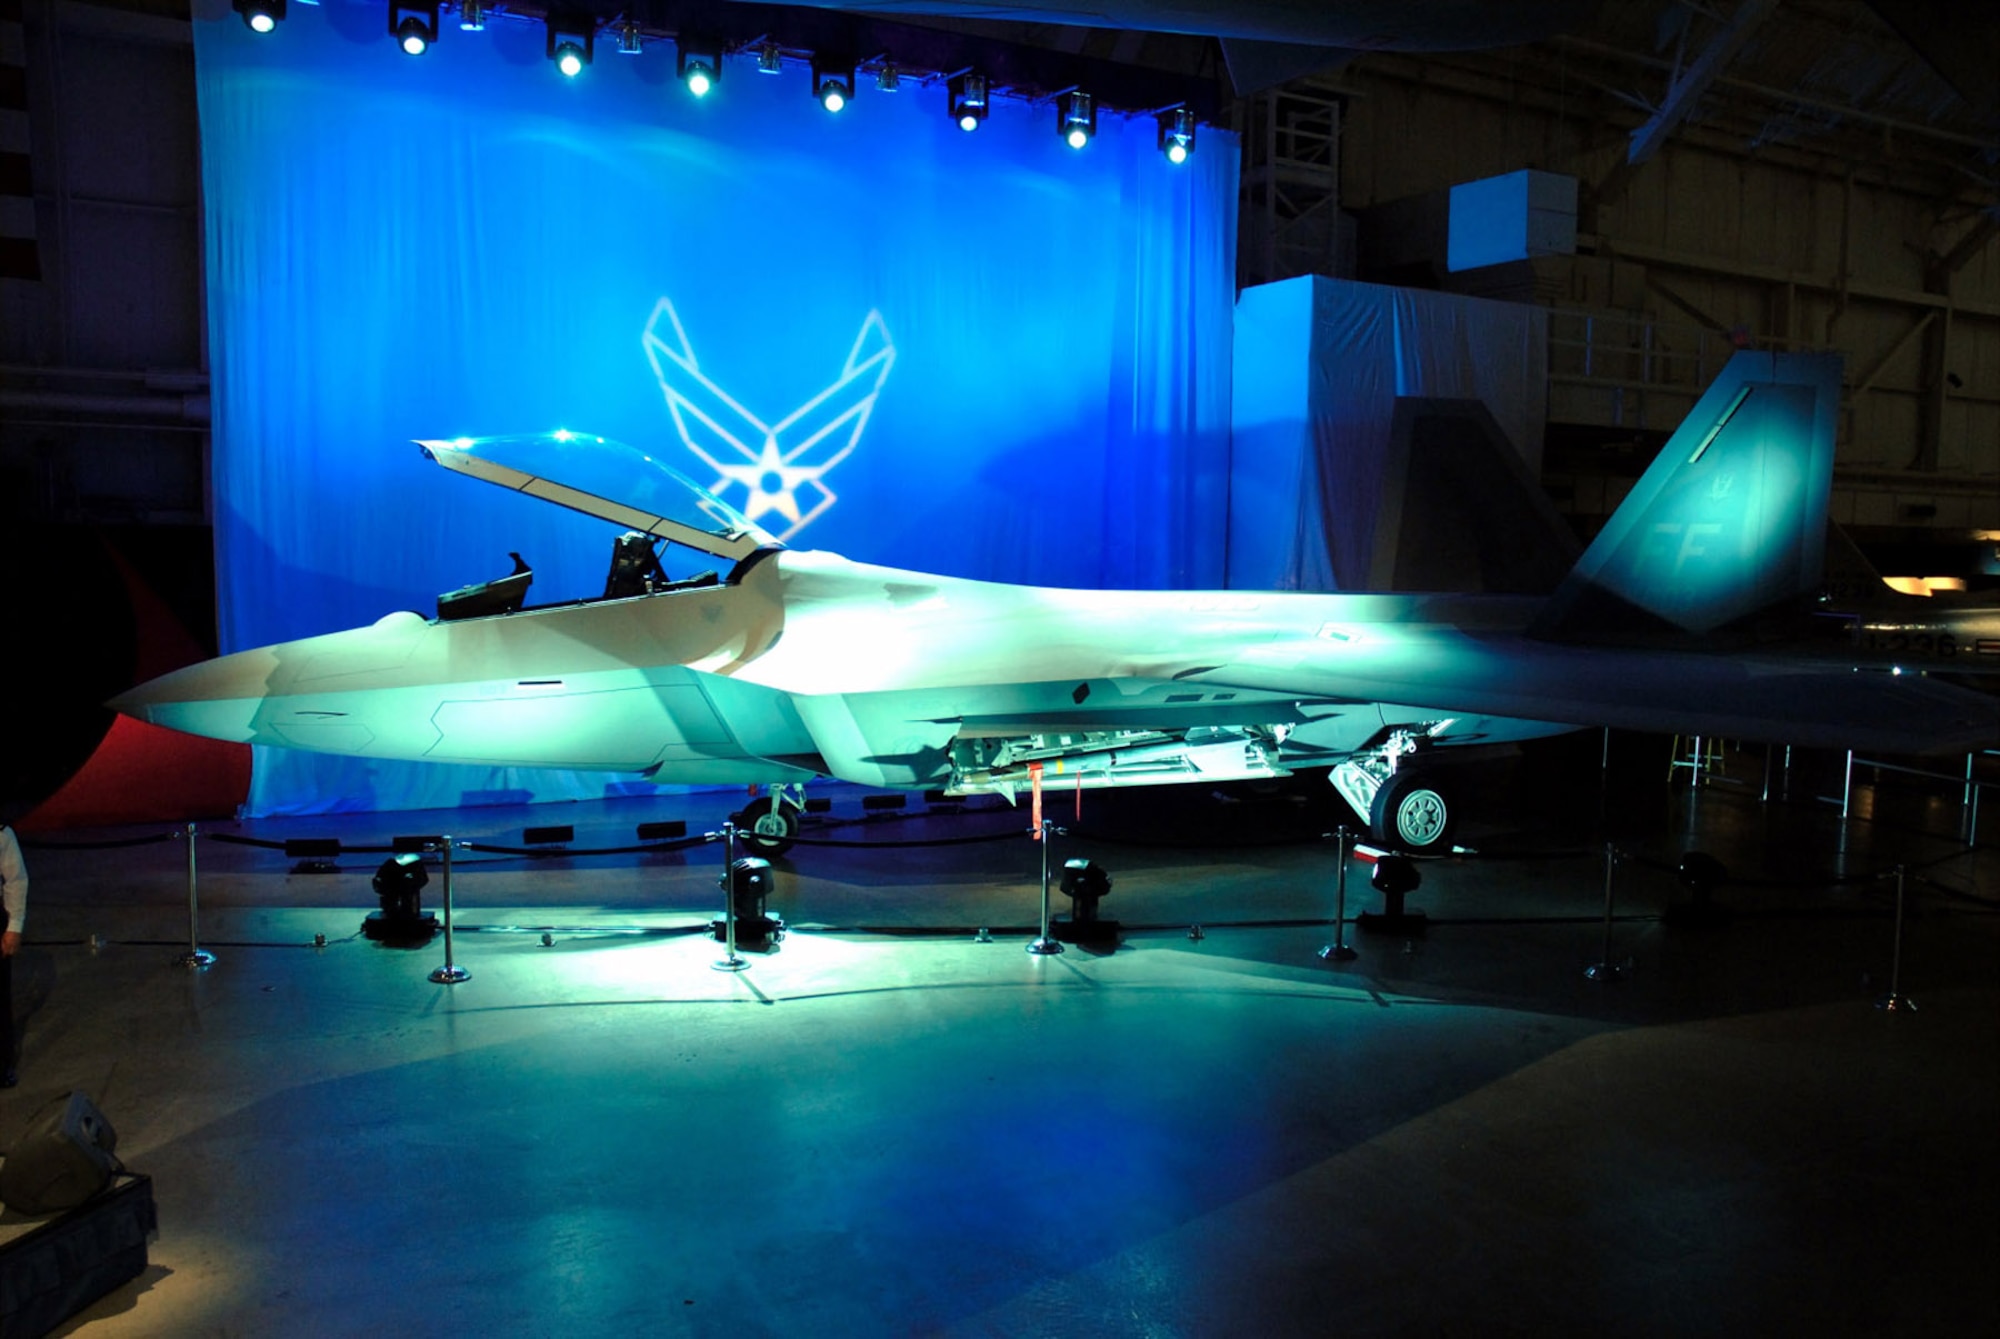 The F-22 Raptor is unveiled at its exhibit opening ceremony at the National Museum of the U.S. Air Force Jan. 18 at Dayton, Ohio. (U.S. Air Force photo) 